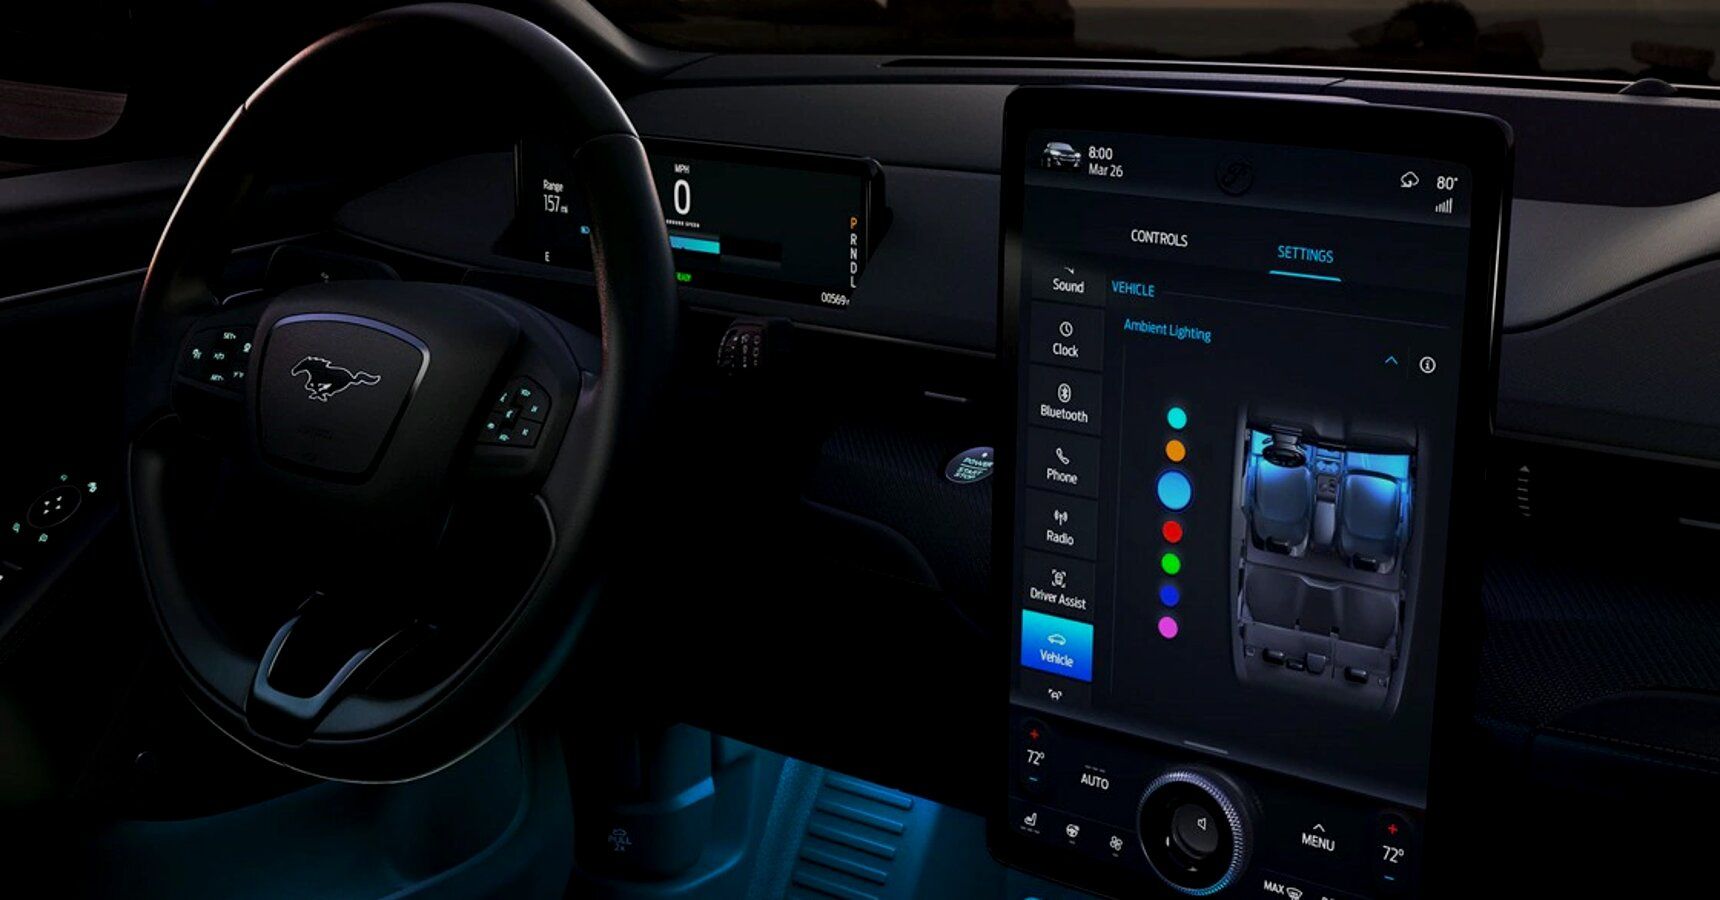 Interiors Of A Ford Car Displaying SYNC Features